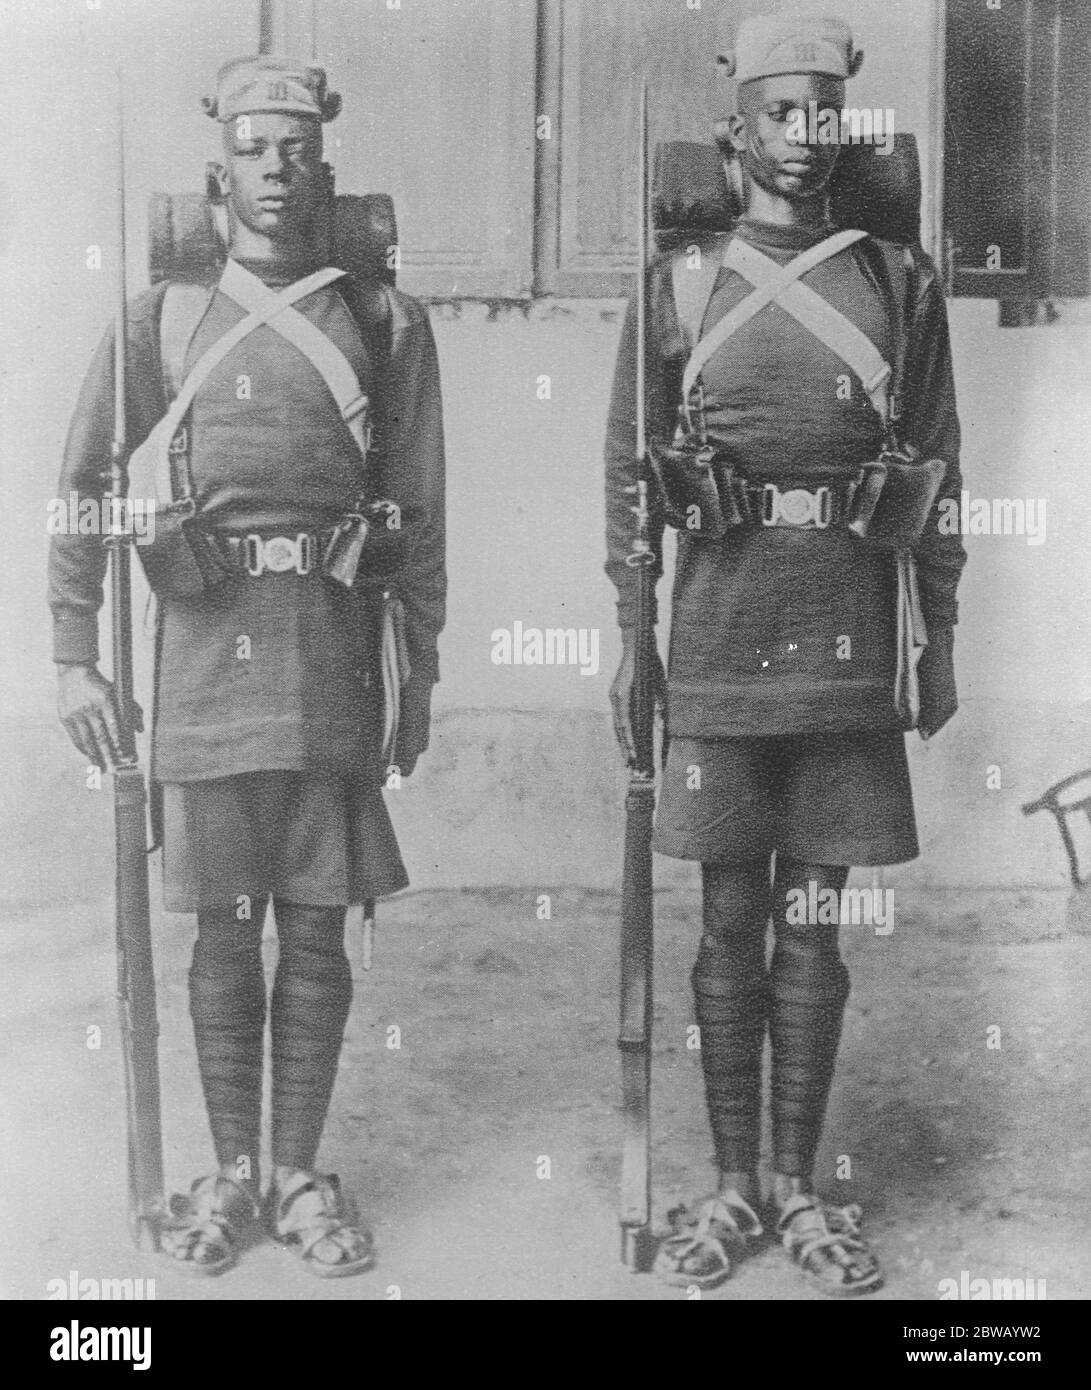 Quelled Kenya Colony Riot Soldiers of the king 's Africans Rifles in service kit . It was men of the corps who when the police lines at Nairobi , were attacked by natives , and replied with rifle fire killing 15 and wounding 30 20 March 1922 Stock Photo